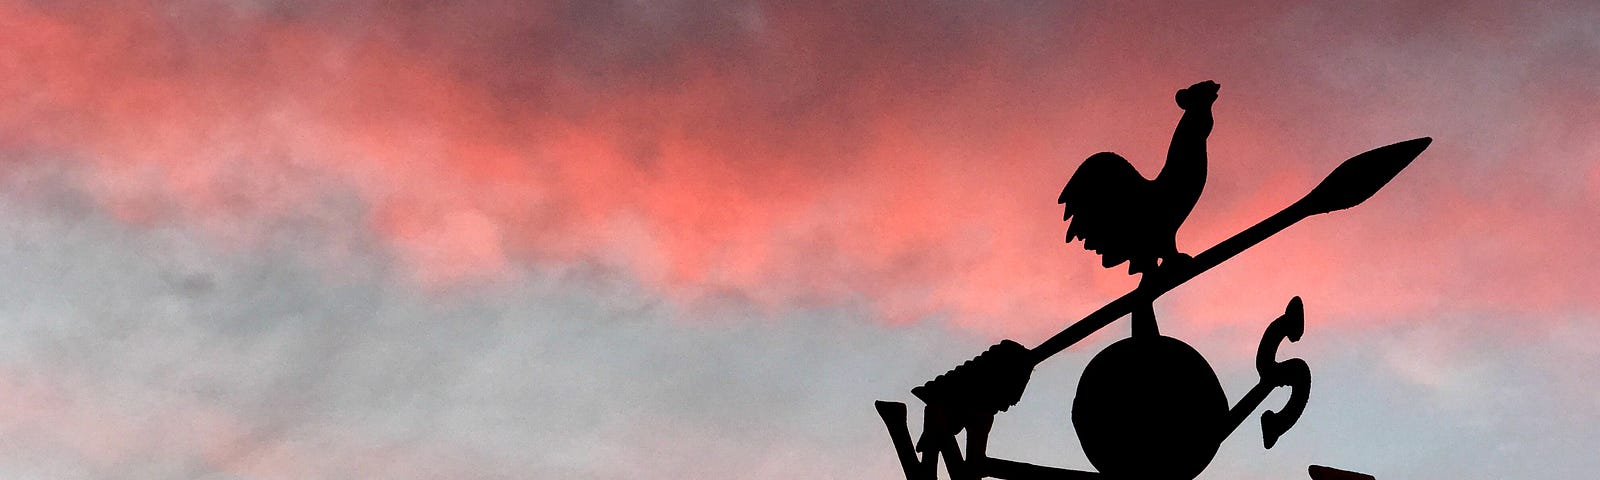 Weather vane in a colorful cloudy sunset.